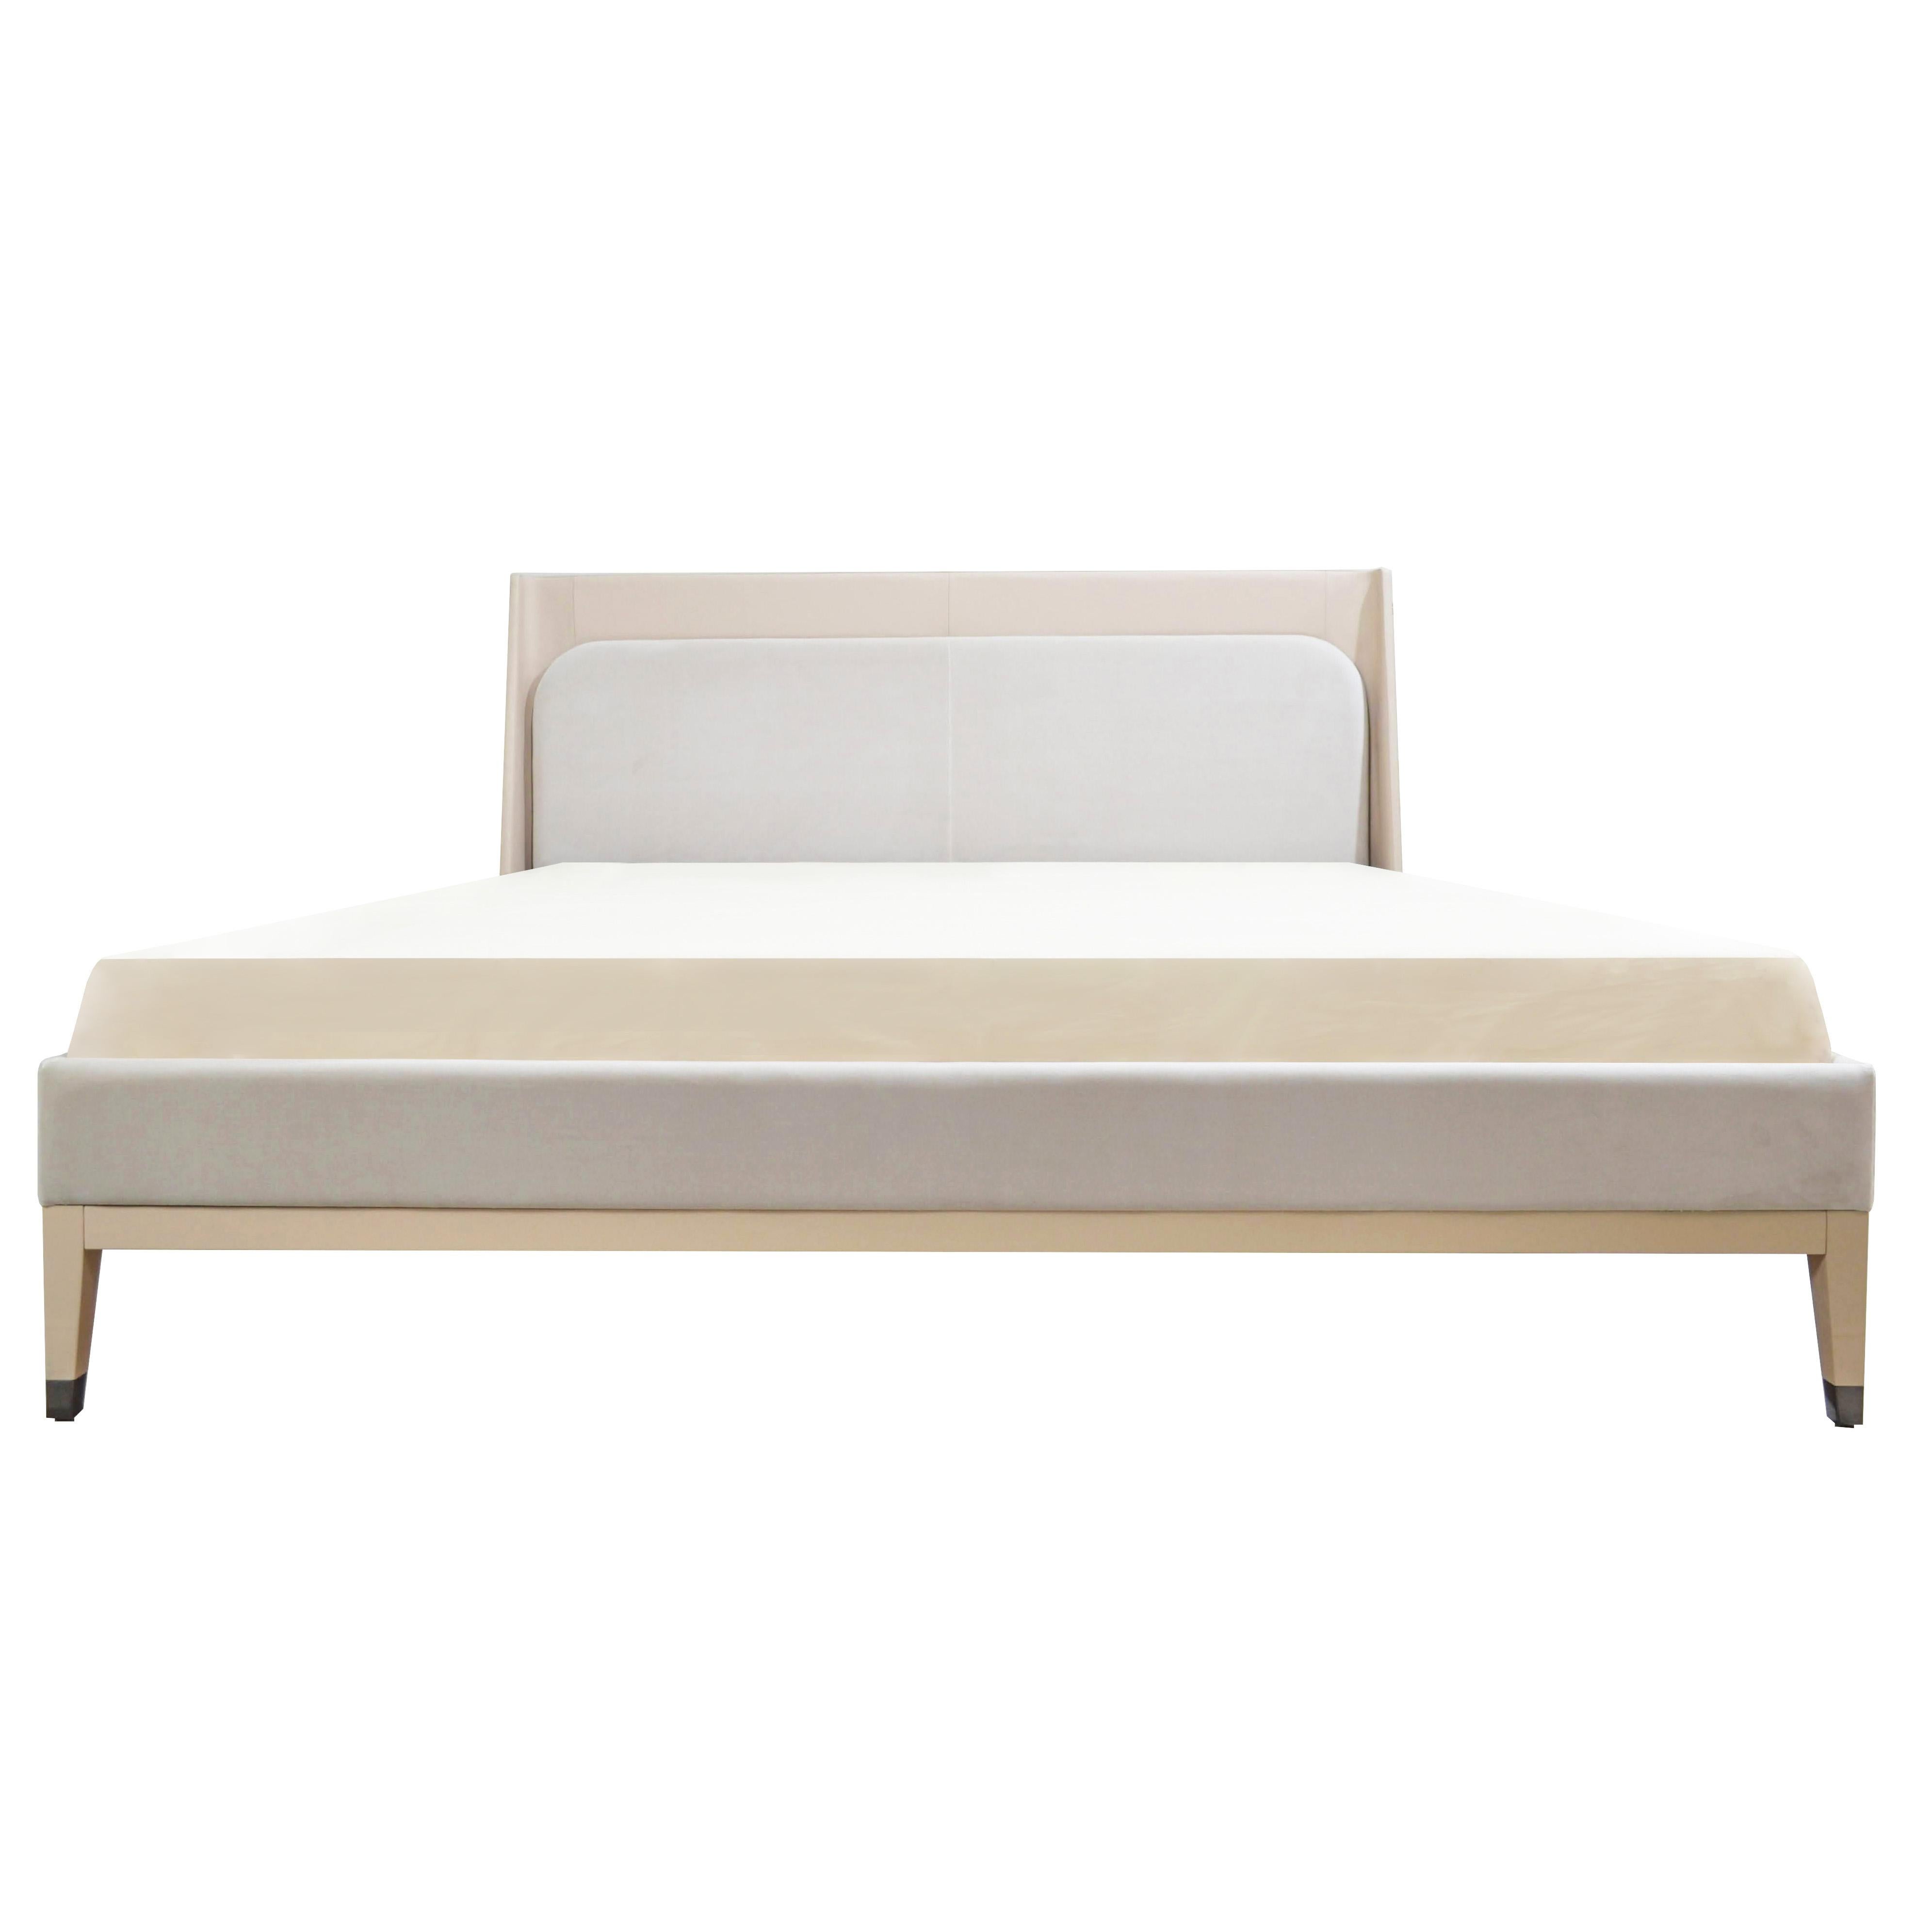 Bed, upholstered, beech wood frame. It is proposed covered in nubuck leather and cotton velvet, but it is customizable. The legs are in laquered Cappucino high-gloss.
Price for a 180 x 200cm mattress size frame.